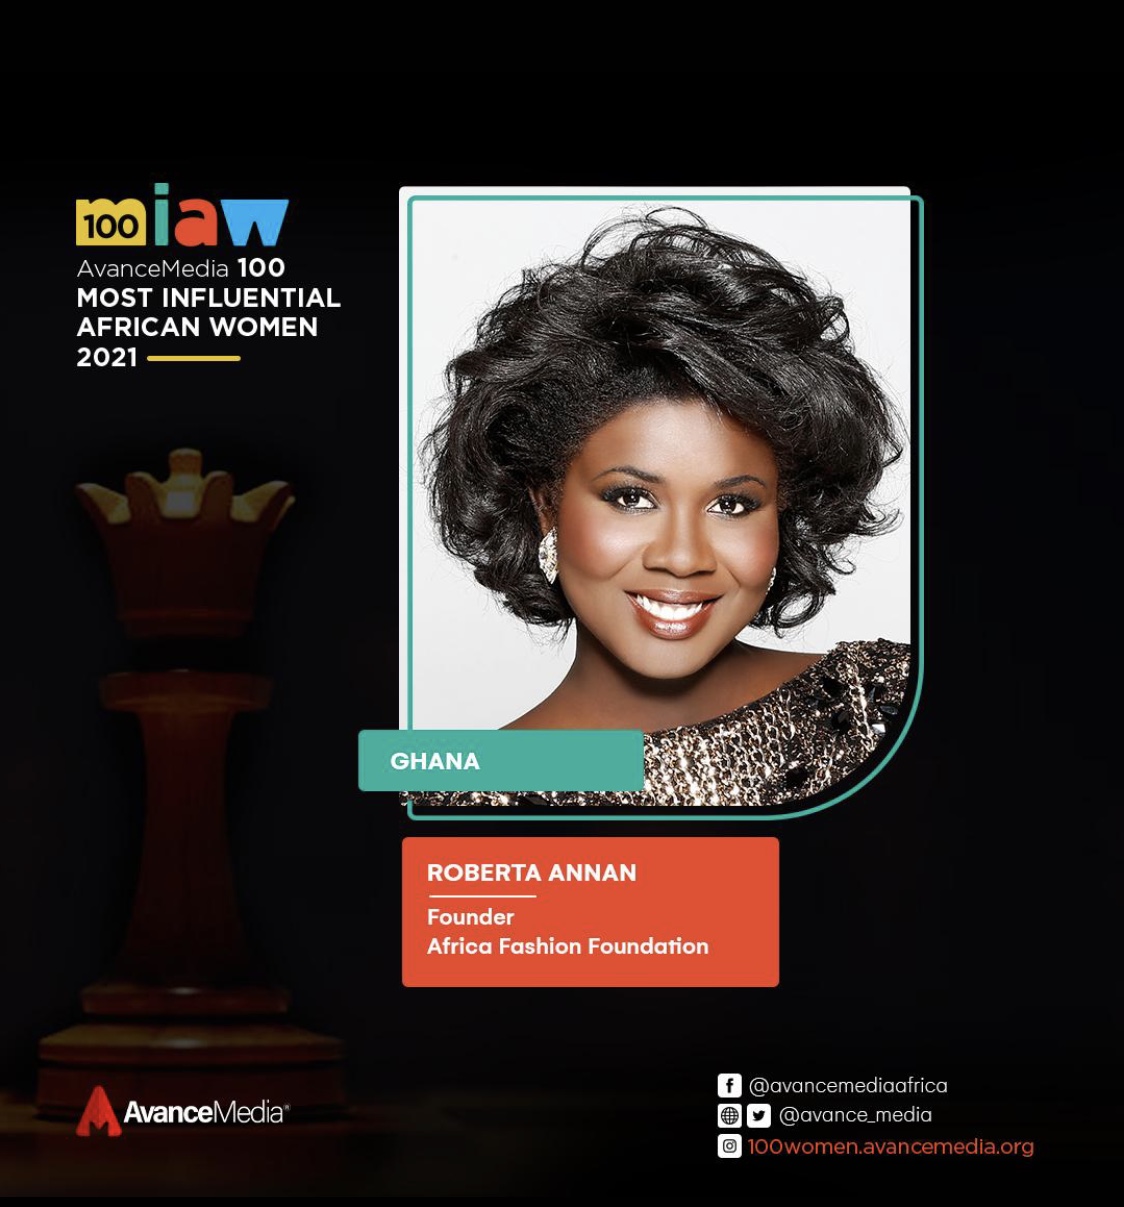 100 MOST INFLUENTIAL AFRICAN WOMEN